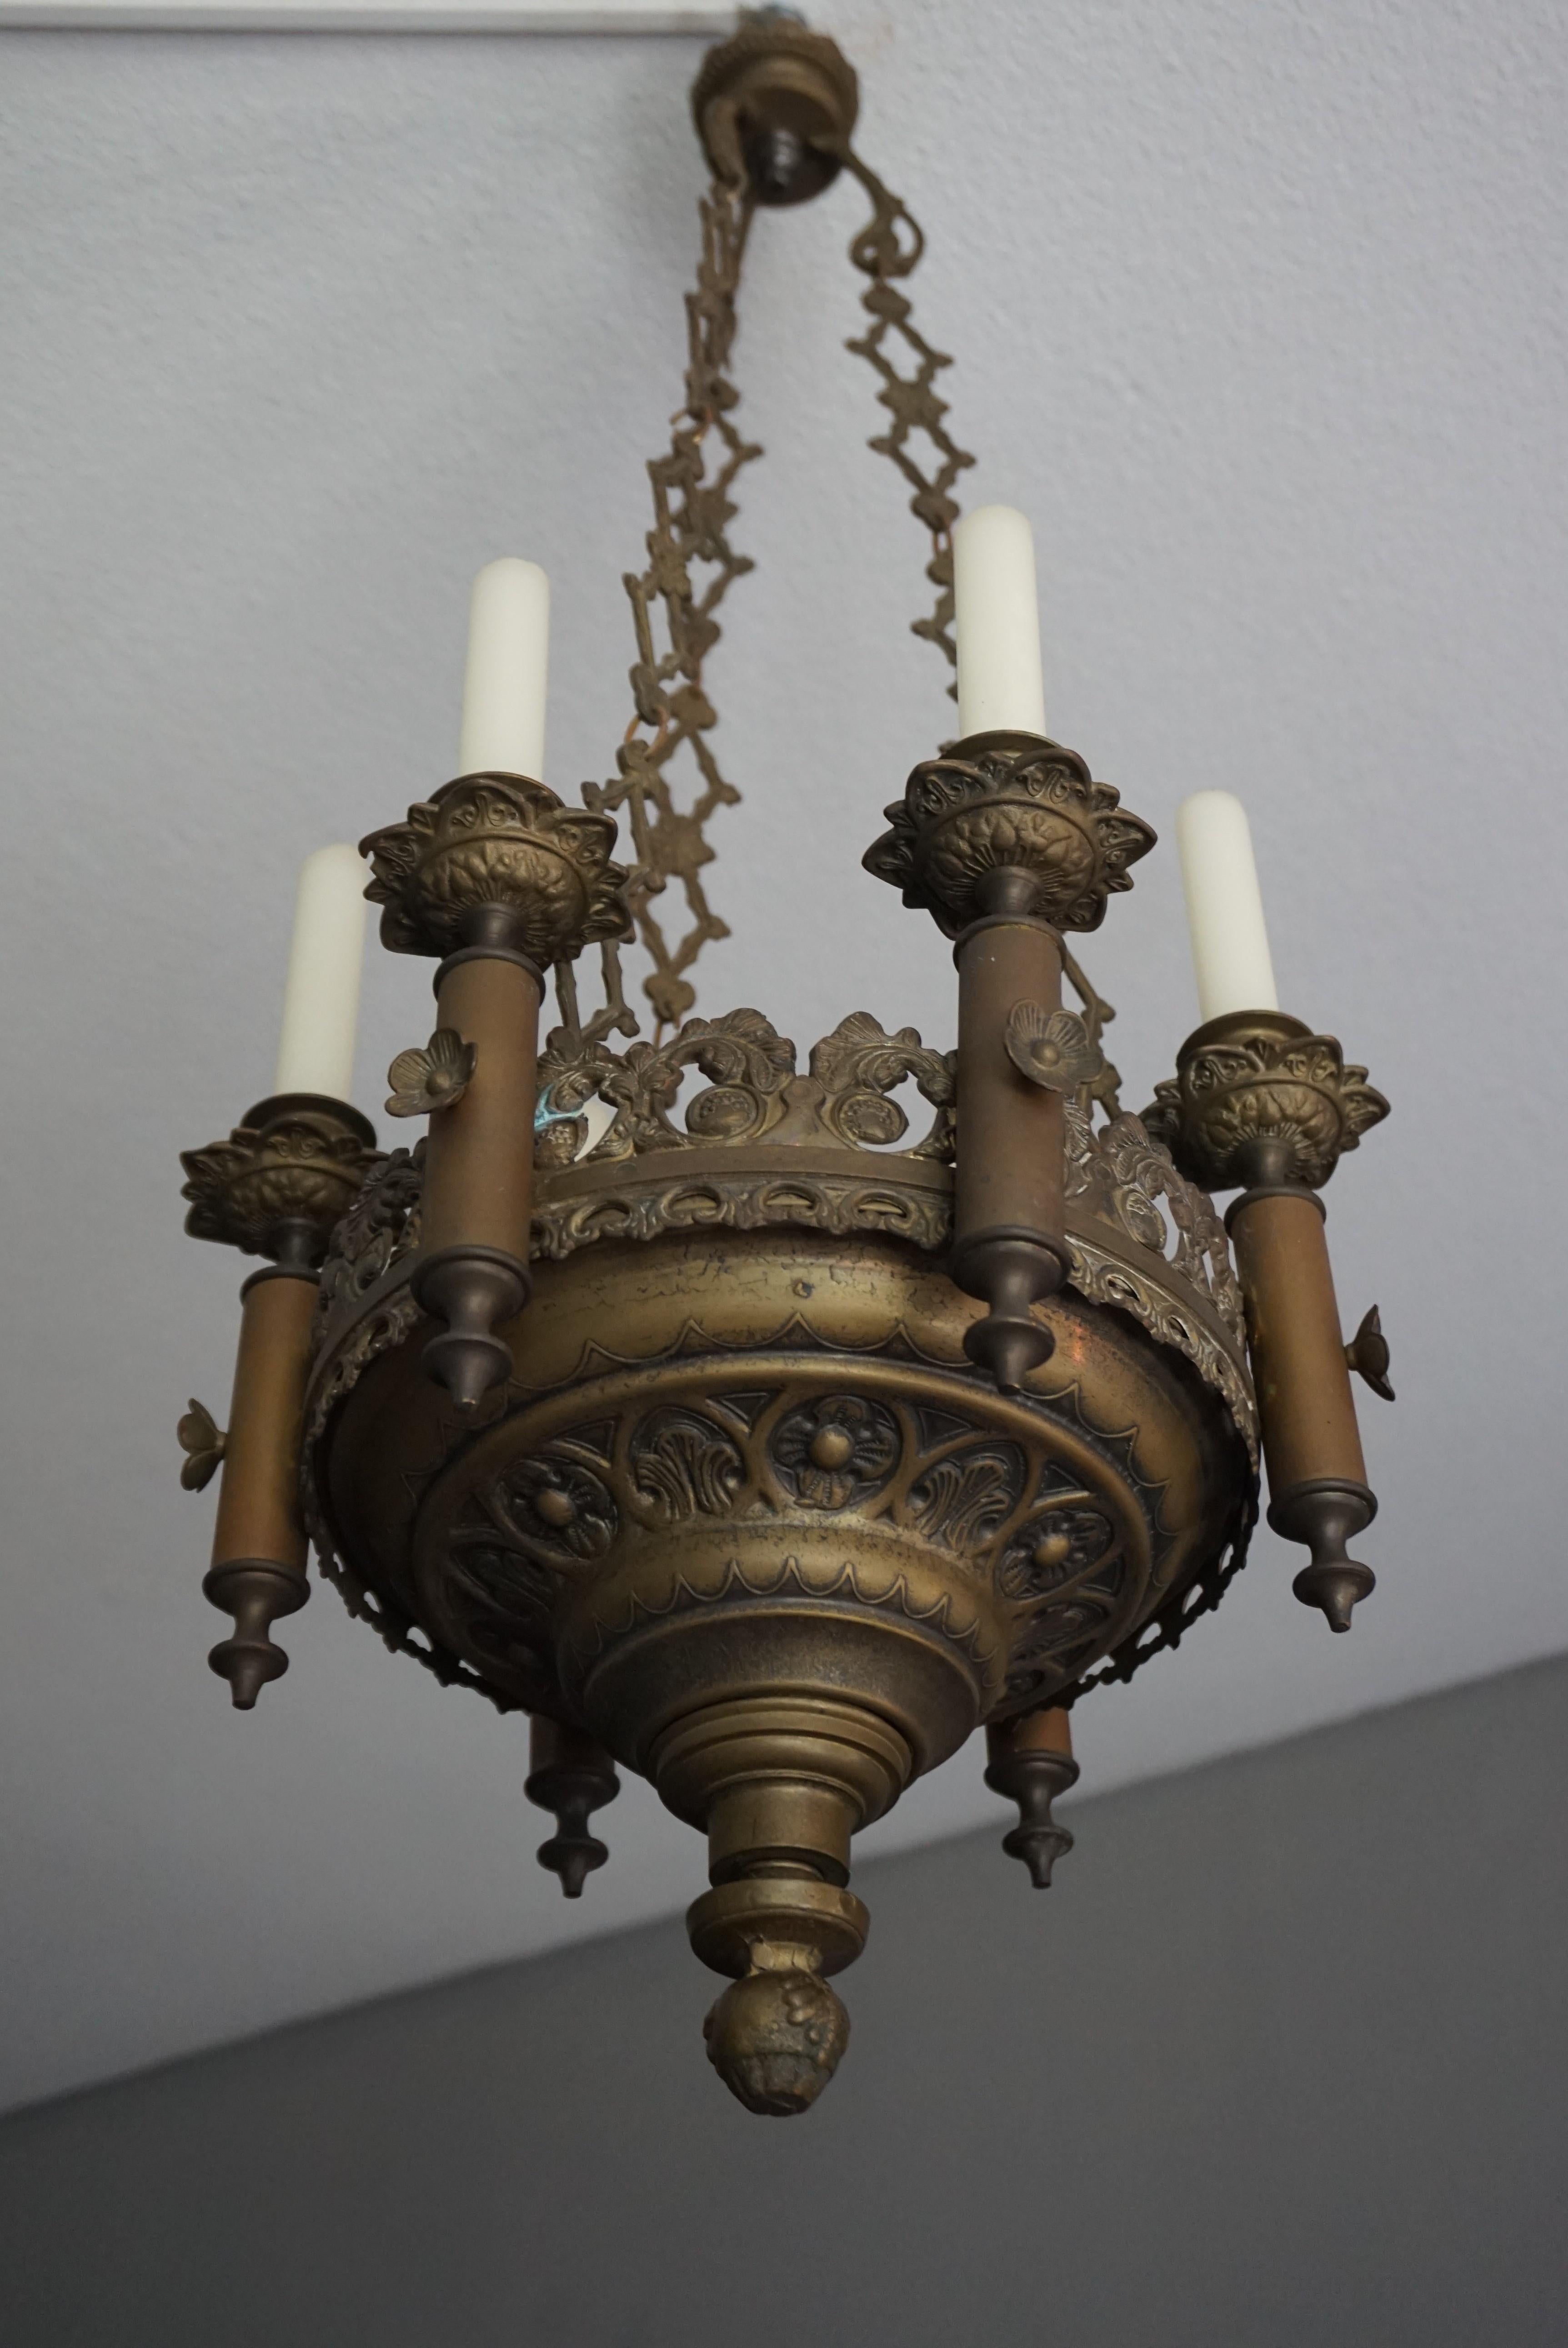 Hand-Crafted Small & Wonderful Bronze & Brass Gothic Revival Church Pendant Six Candleholder